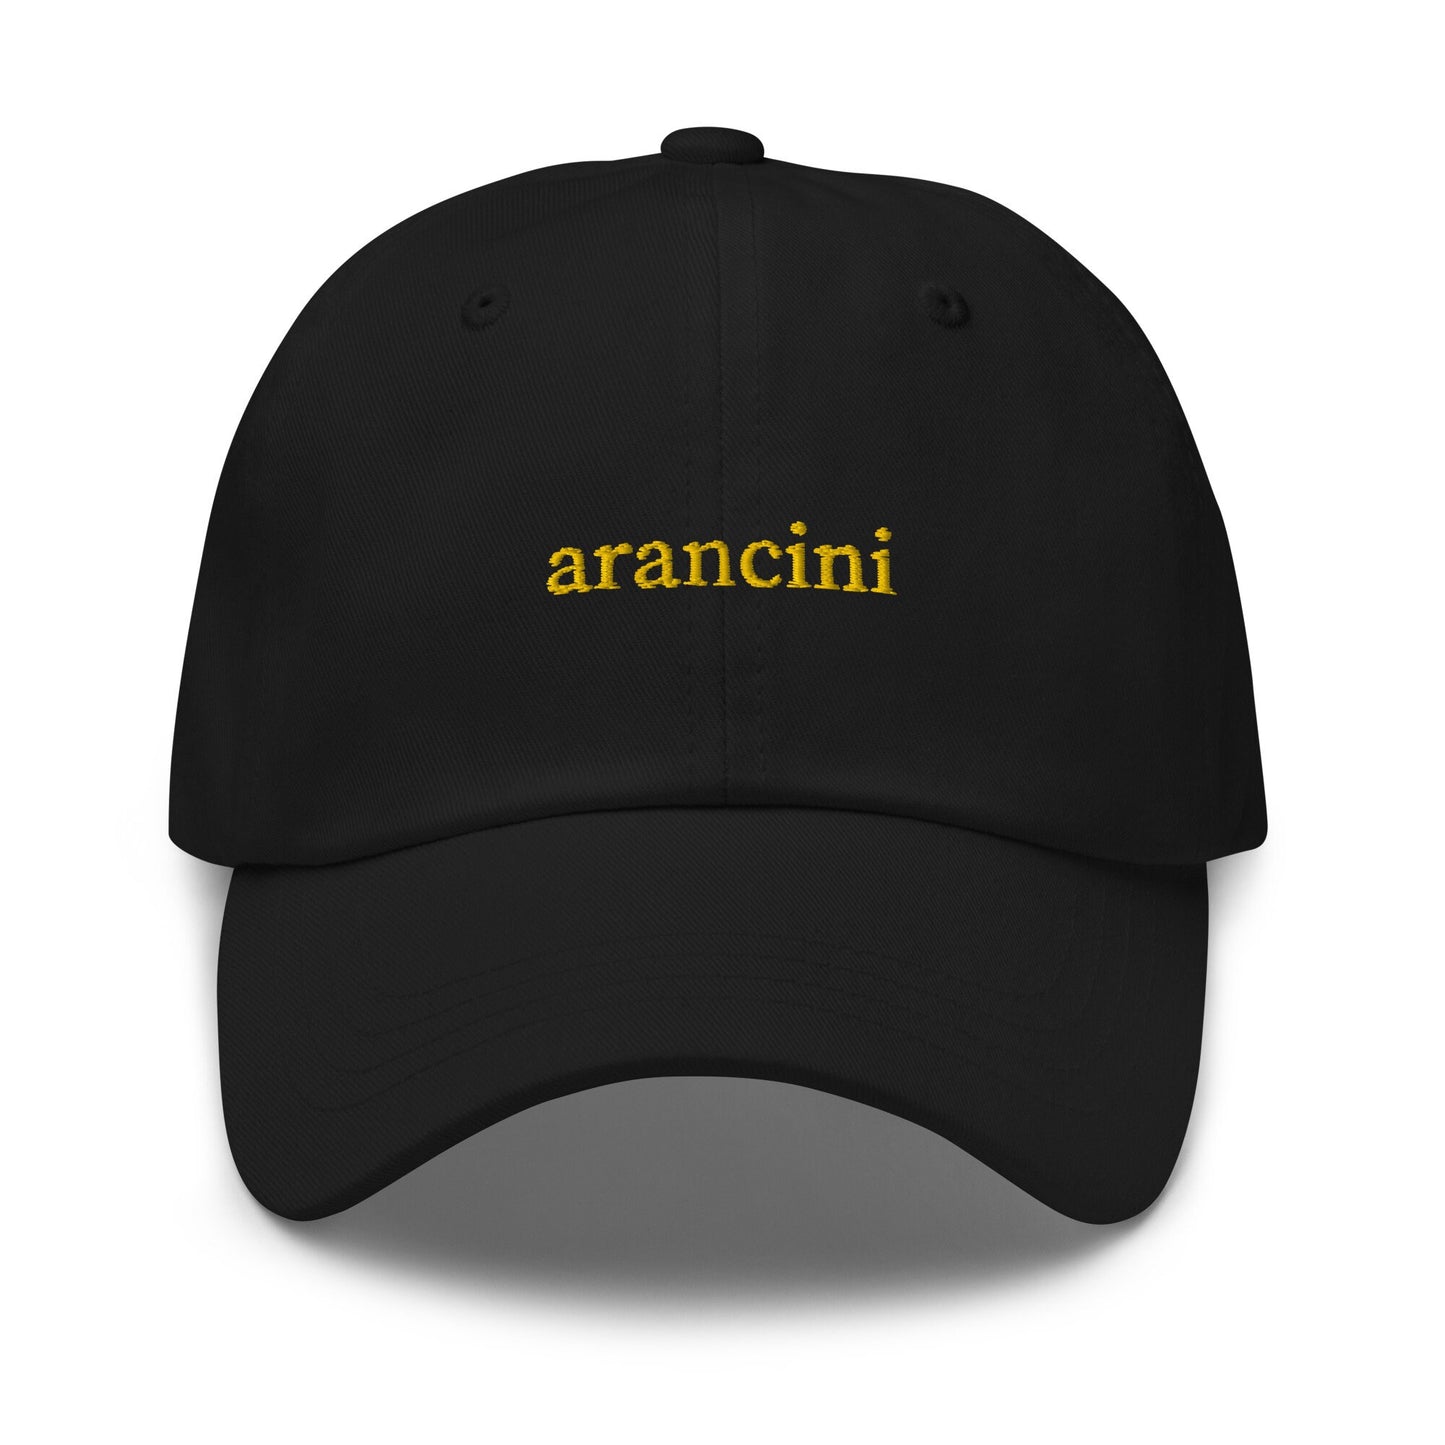 Arancini Dad Hat - Gift for Italian food lovers - Cotton embroidered Cap